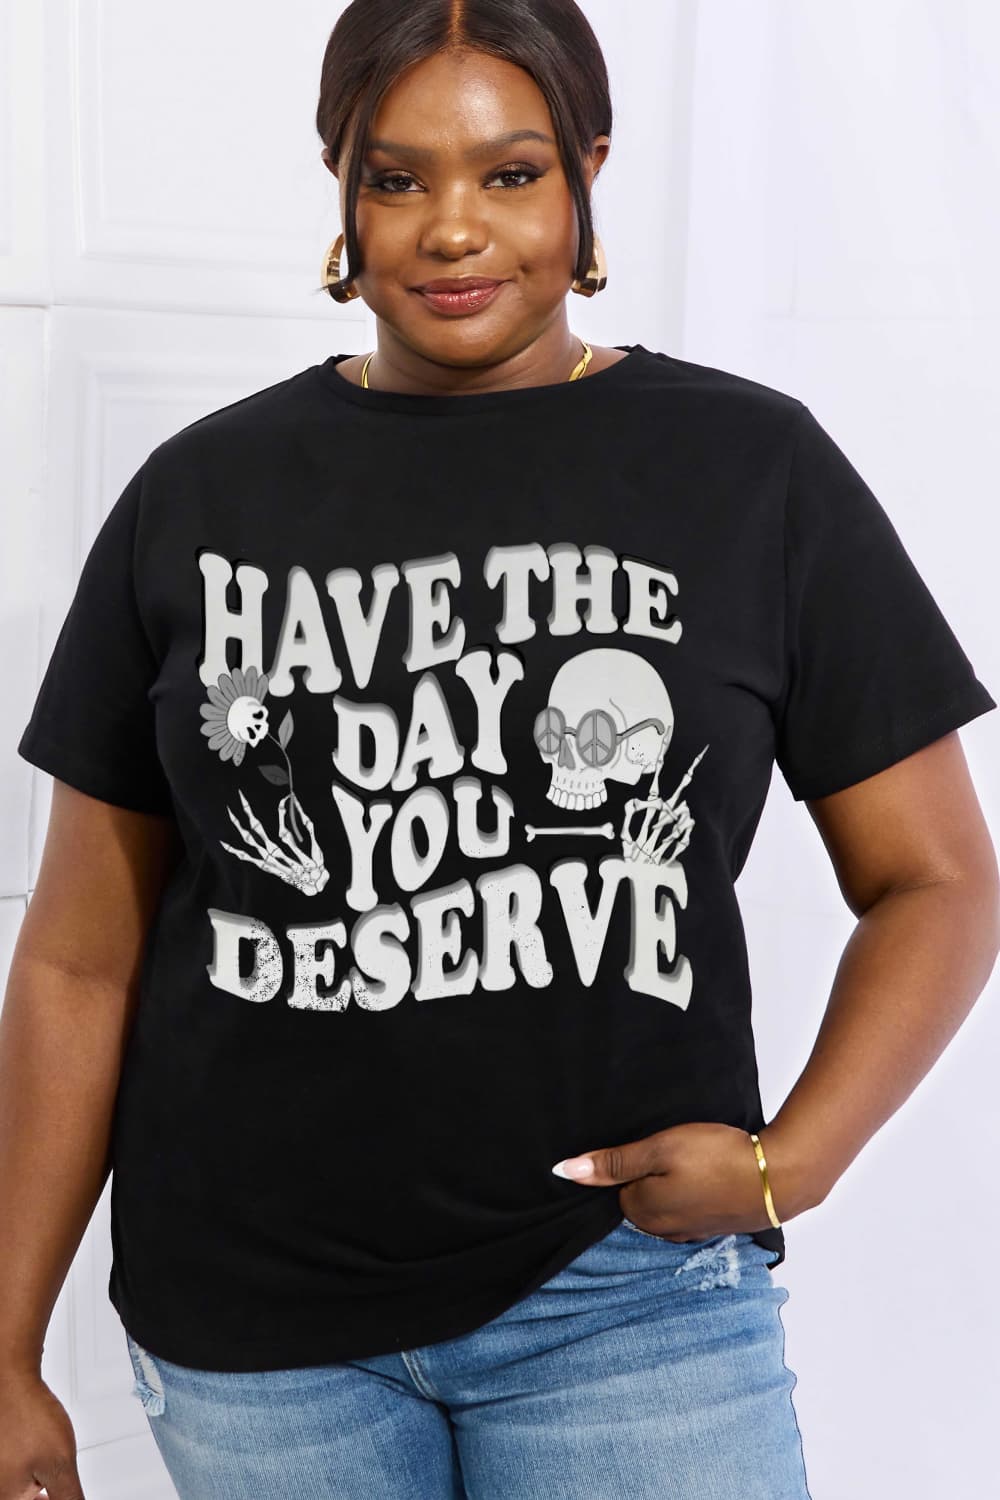 Black Simply Love Full Size HAVE THE DAY YOU DESERVE Graphic Cotton Tee